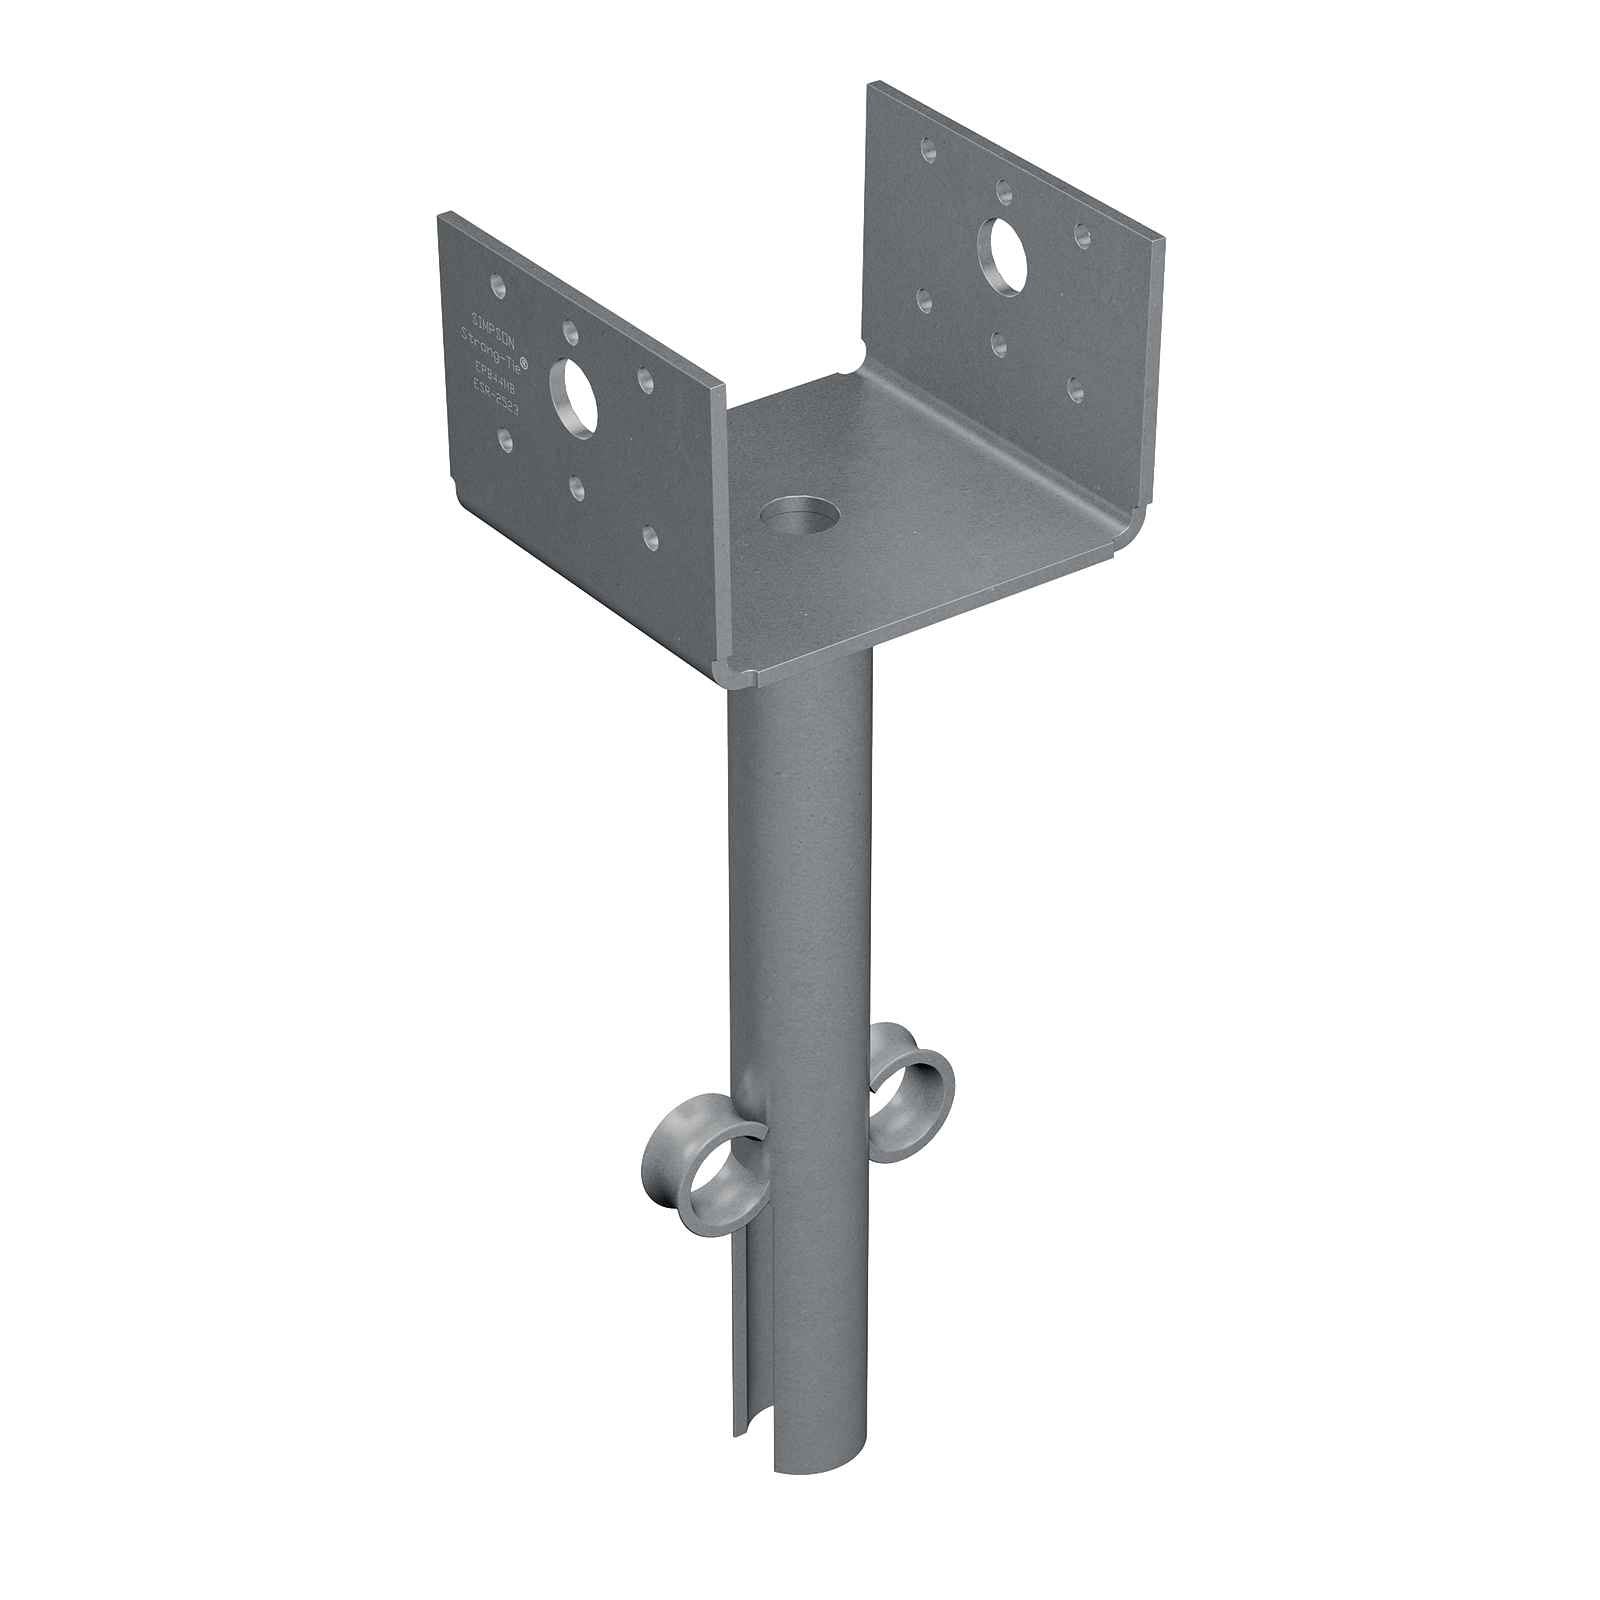 Simpson EPB44MB 4x4 Elevated Post Base - Gray Paint